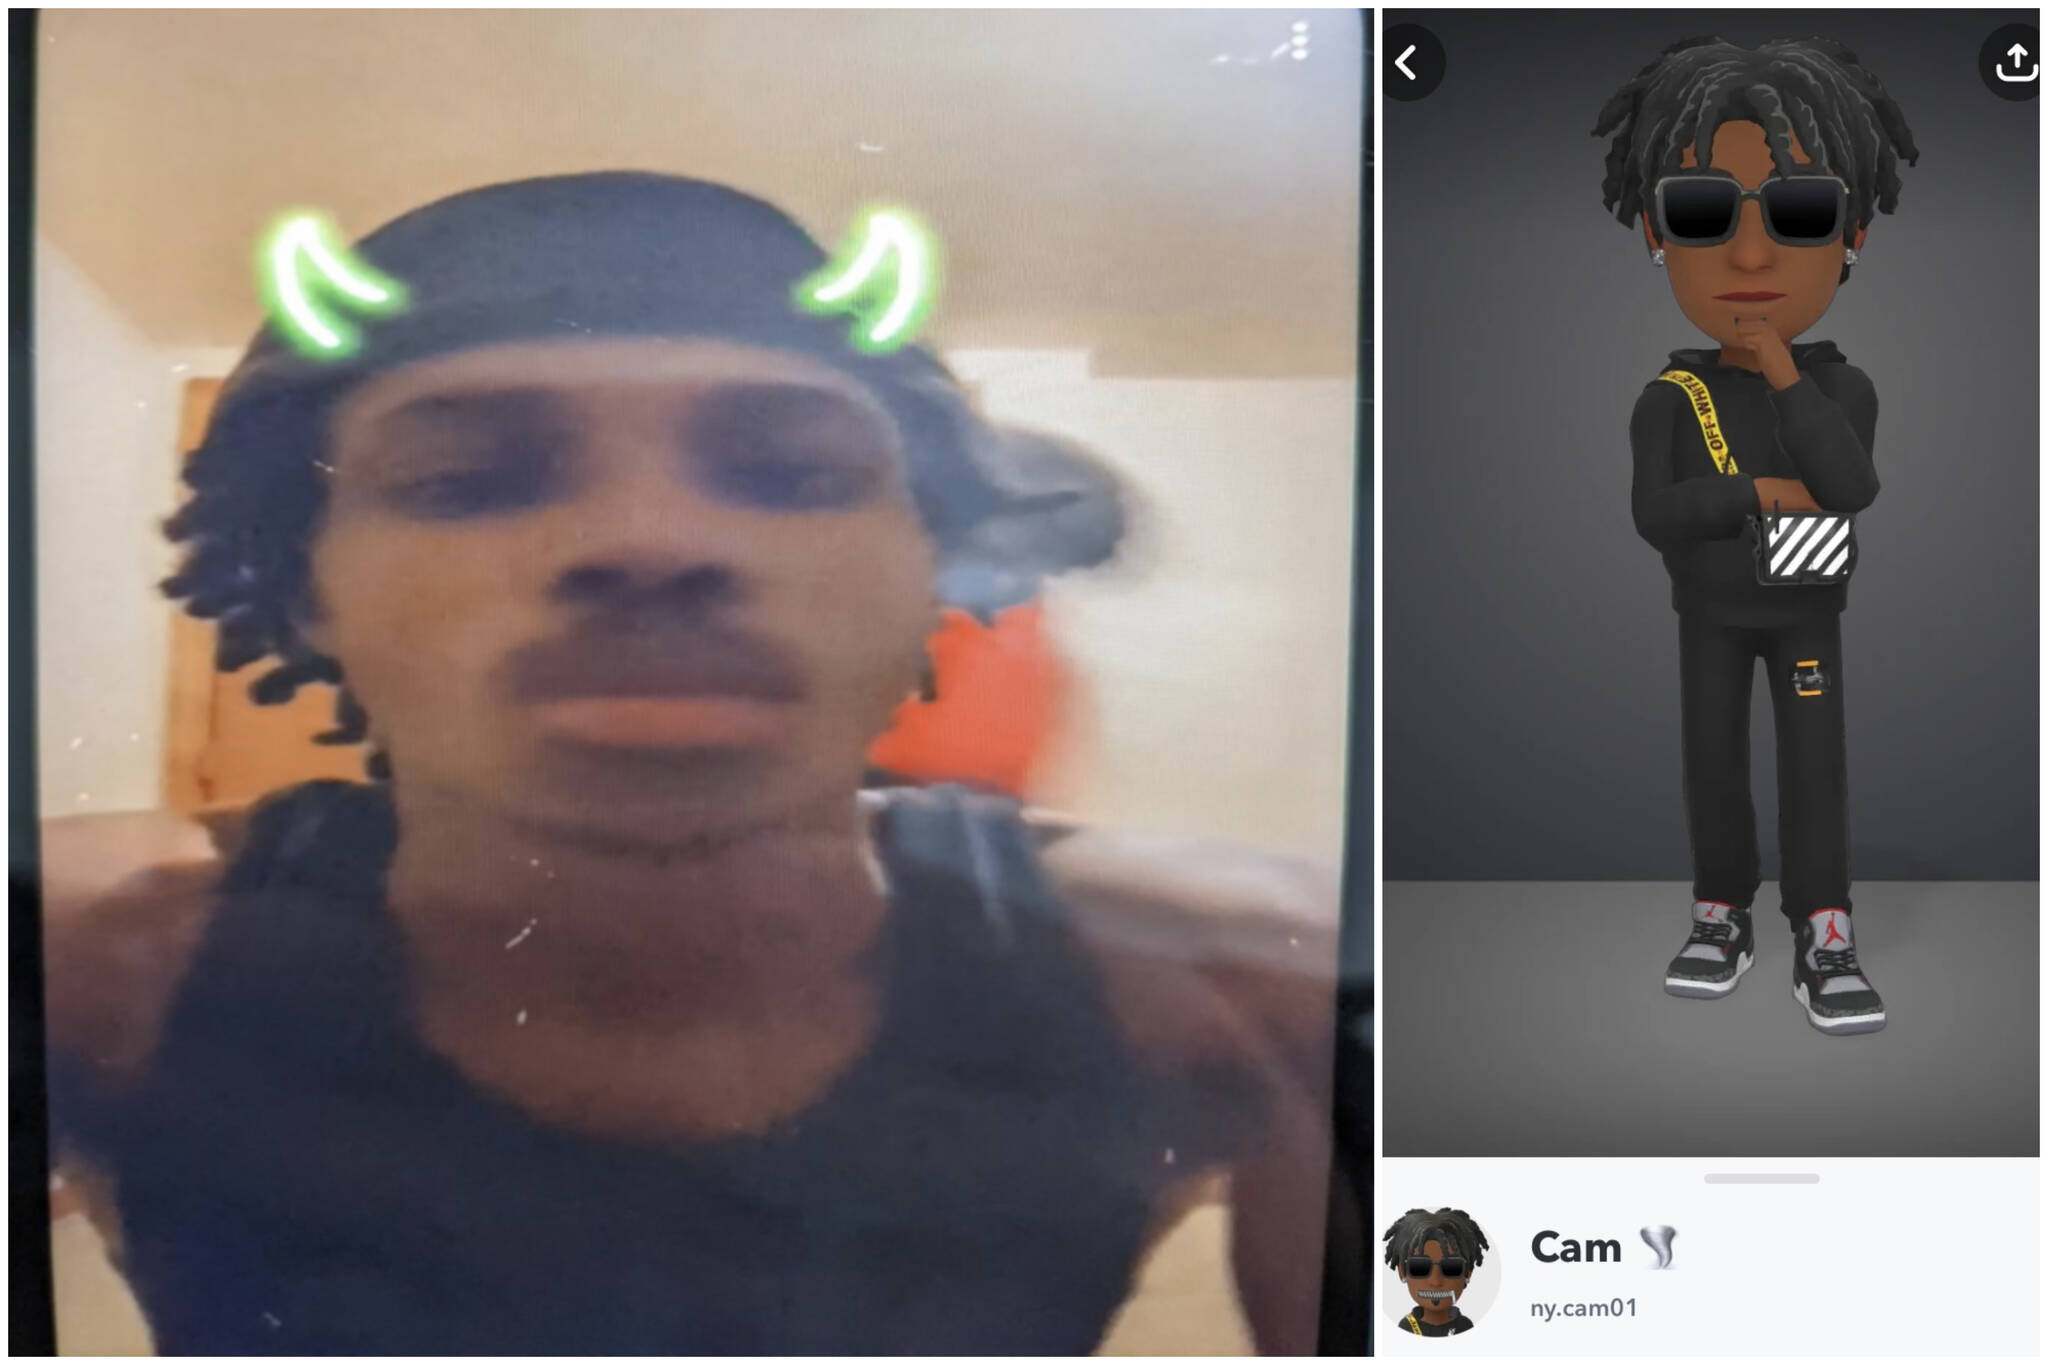 This combination photo shows Cameron McEwen and an avatar associated with a Snapchat account that authorities say was used by McEwen, who was recently arrested on charges of  sexual exploitation of a minor and one count of making extortionate interstate communications. (FBI)